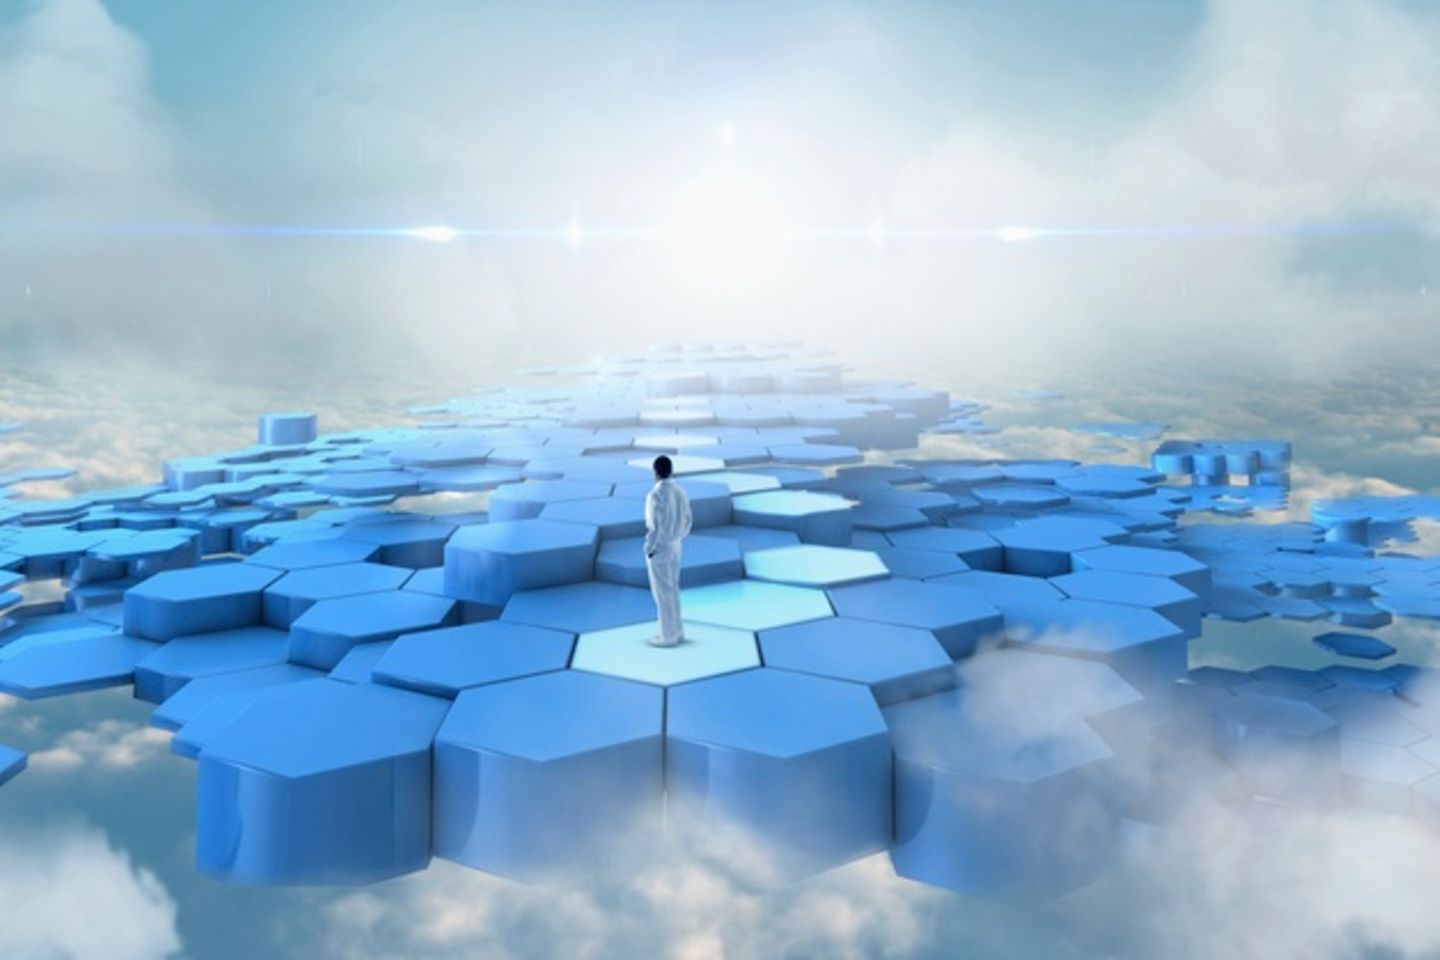 A man in a white suit stands on blue honeycomb blocks floating in the sky.